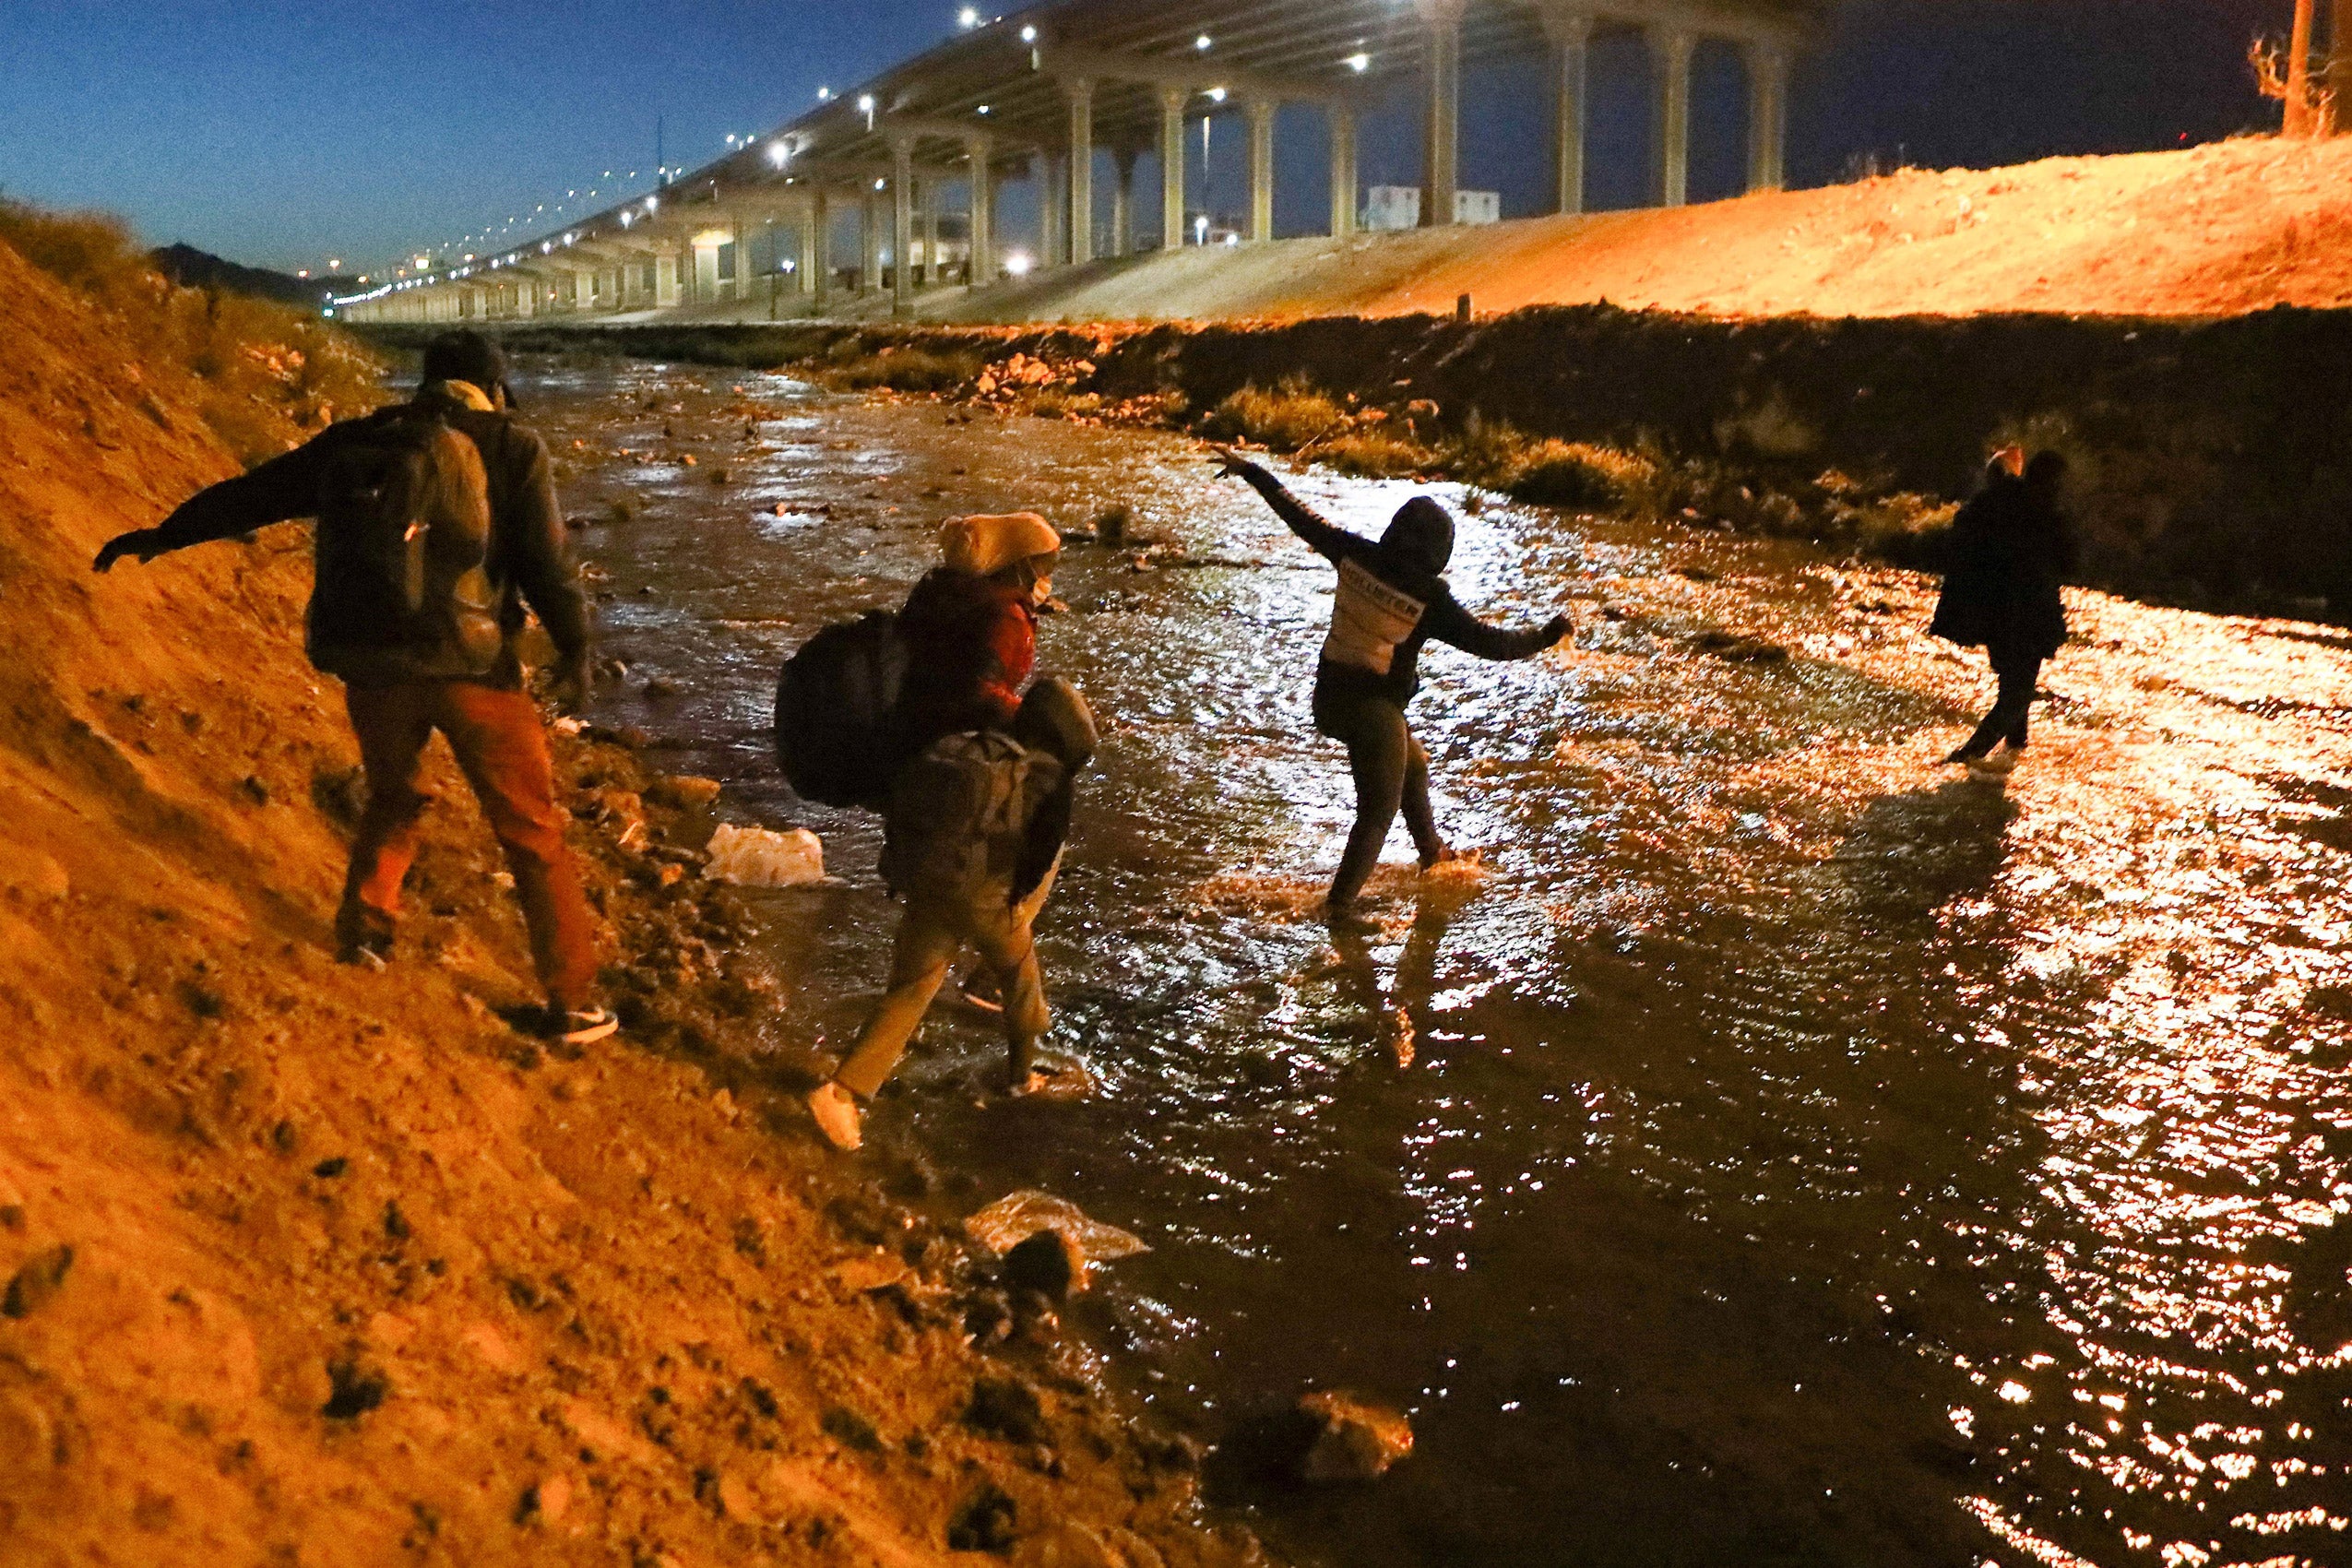 Four individuals wearing backpacks crossing over river at night